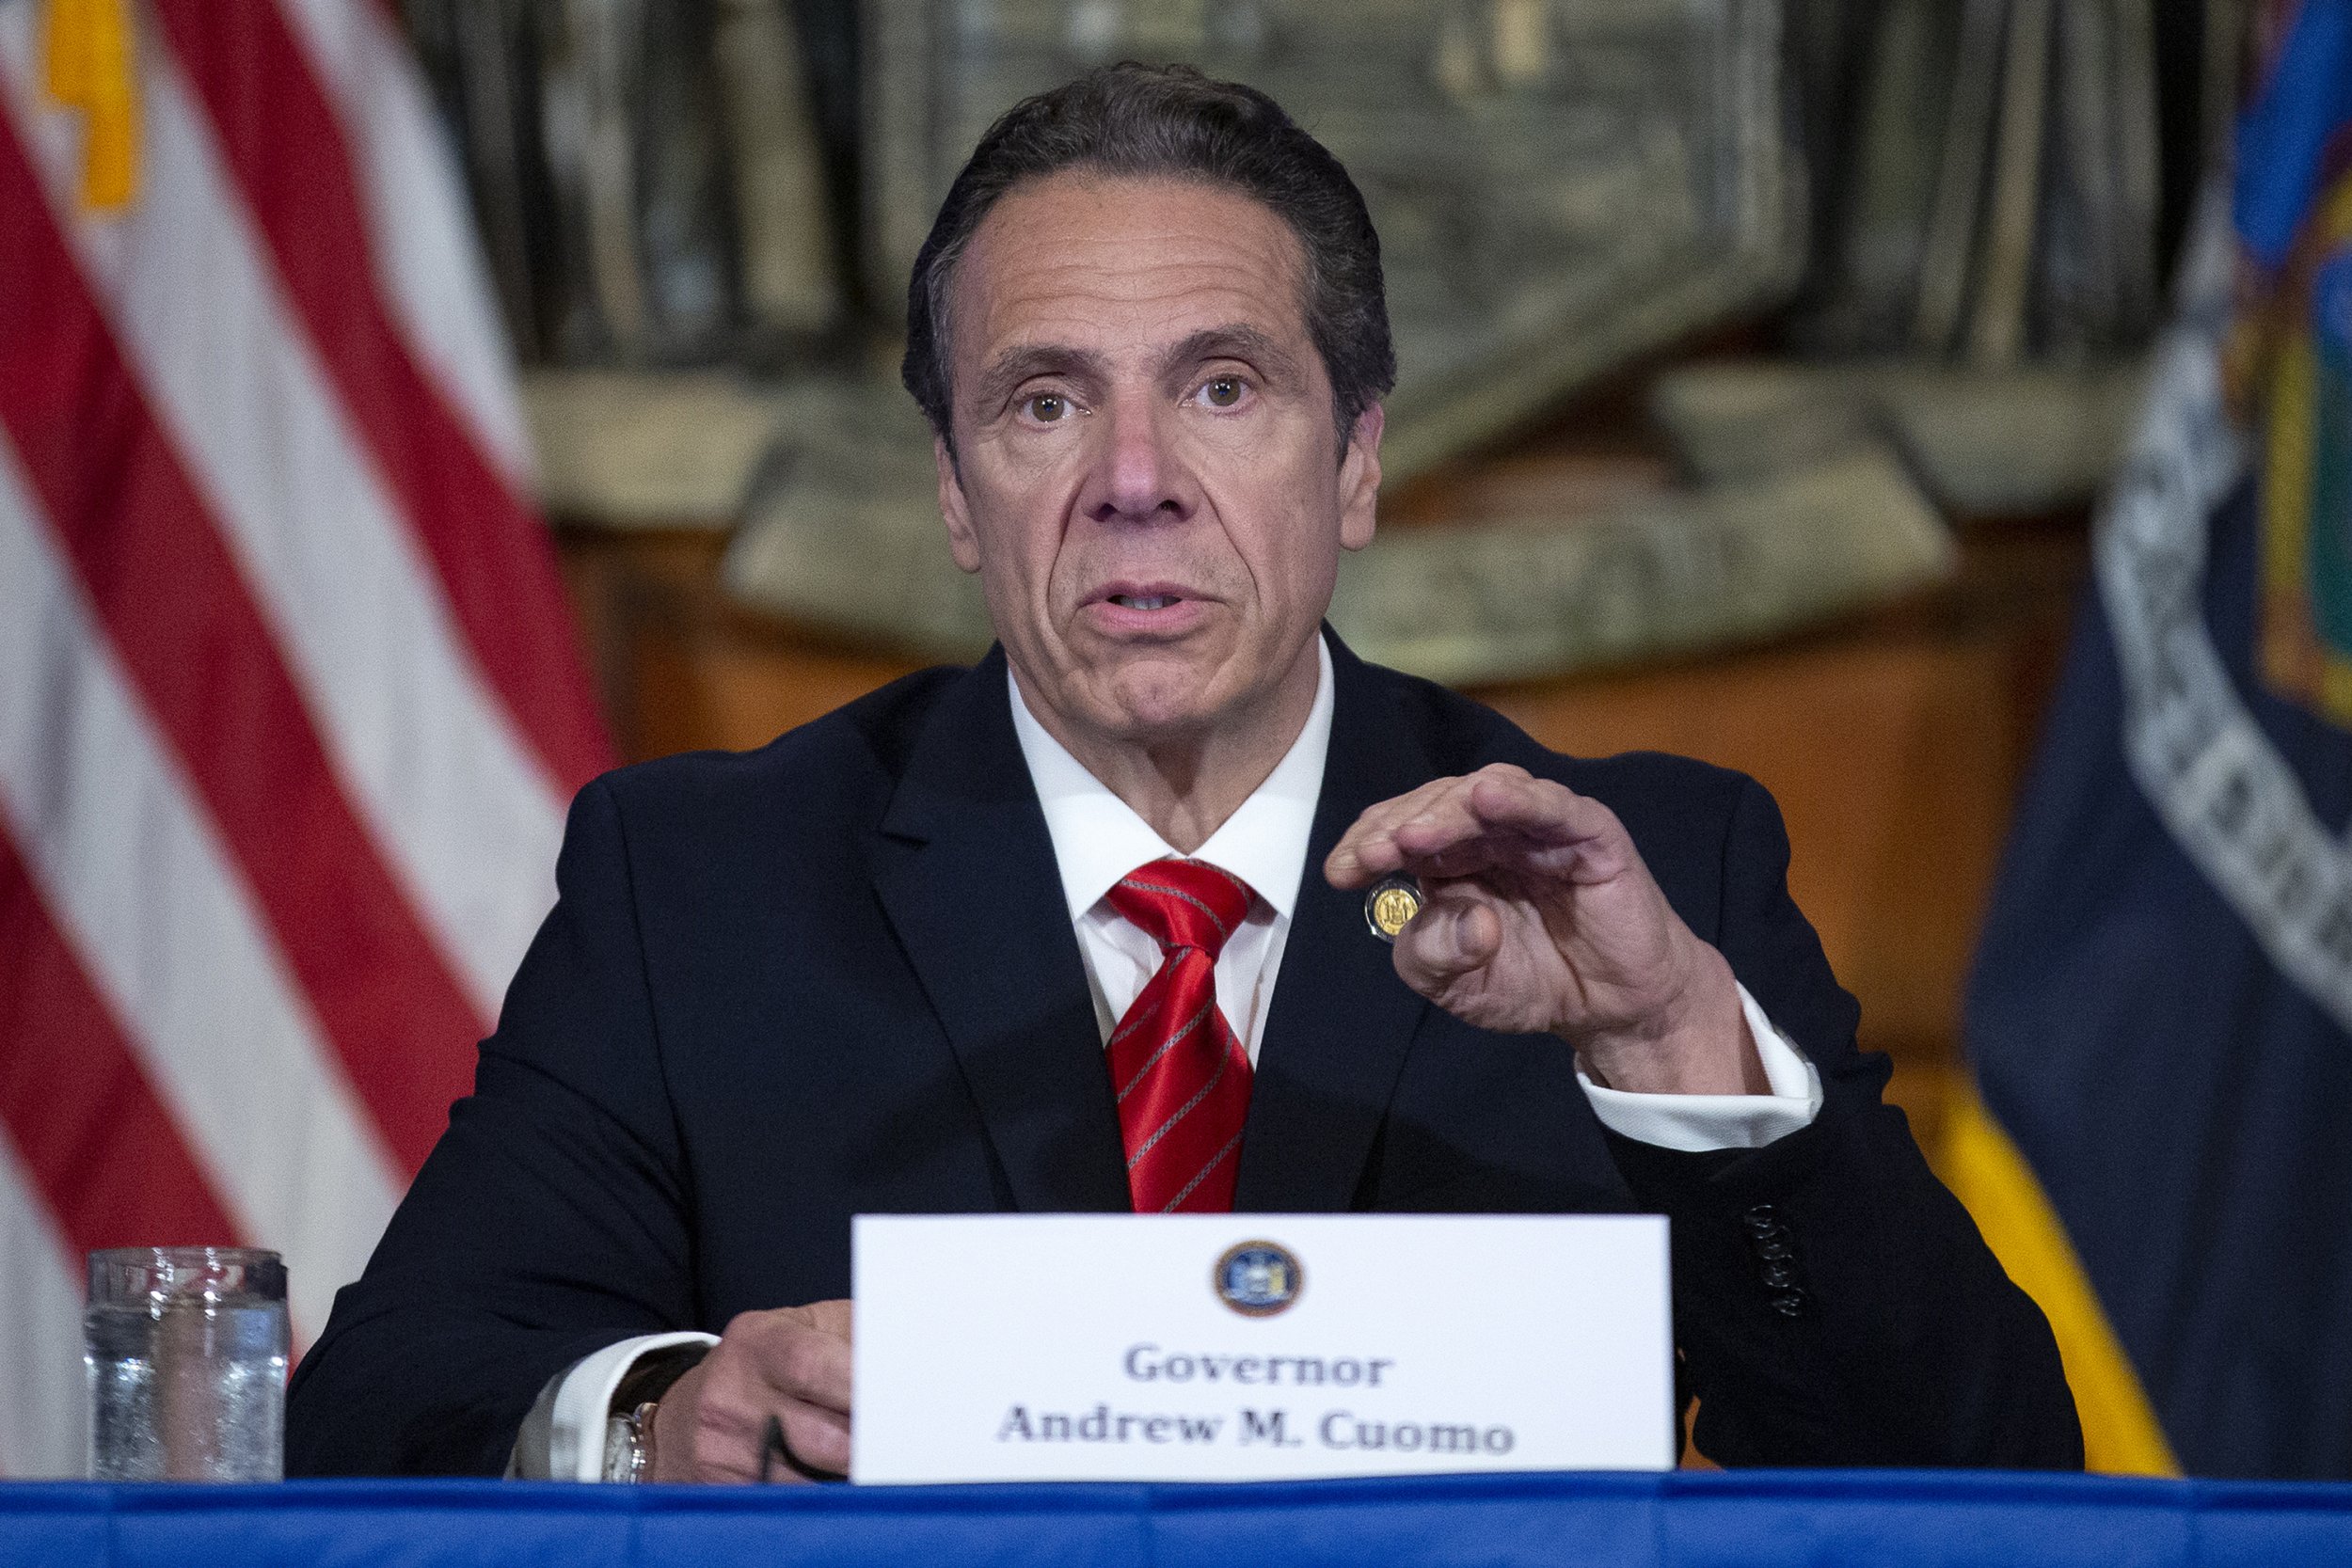 Who is New York Governor Andrew Cuomo